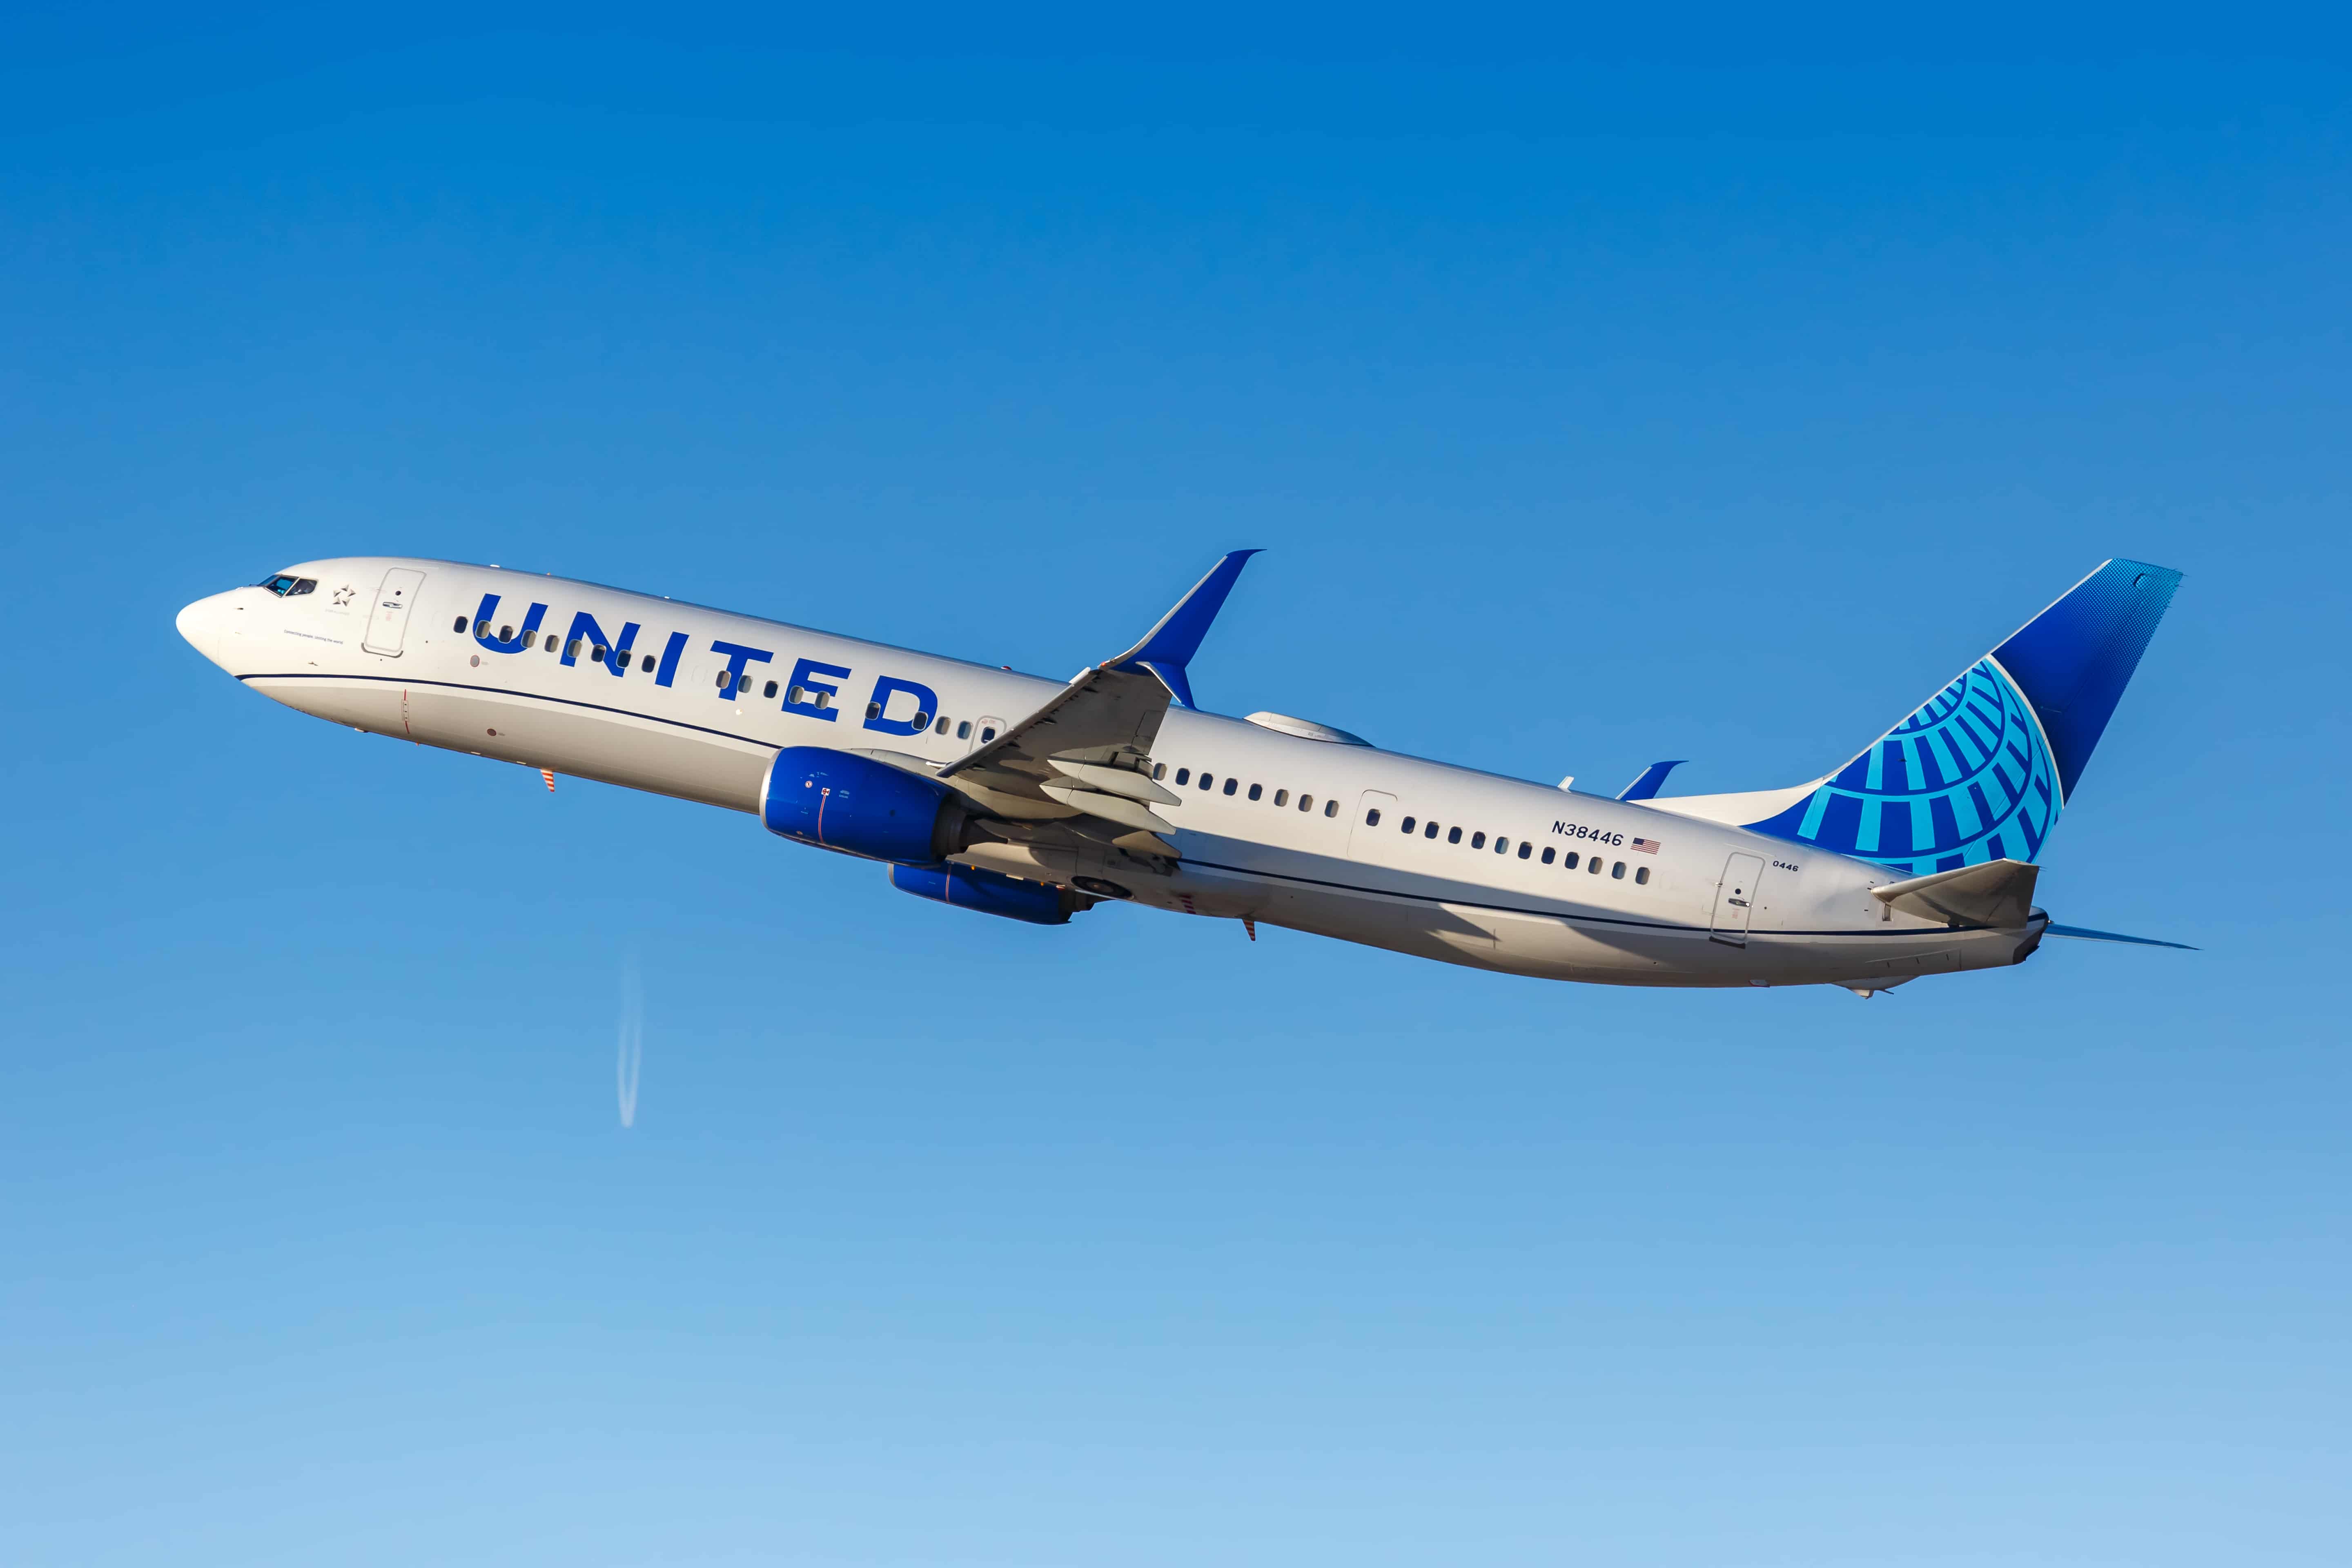 United Boeing aircraft is taking off.